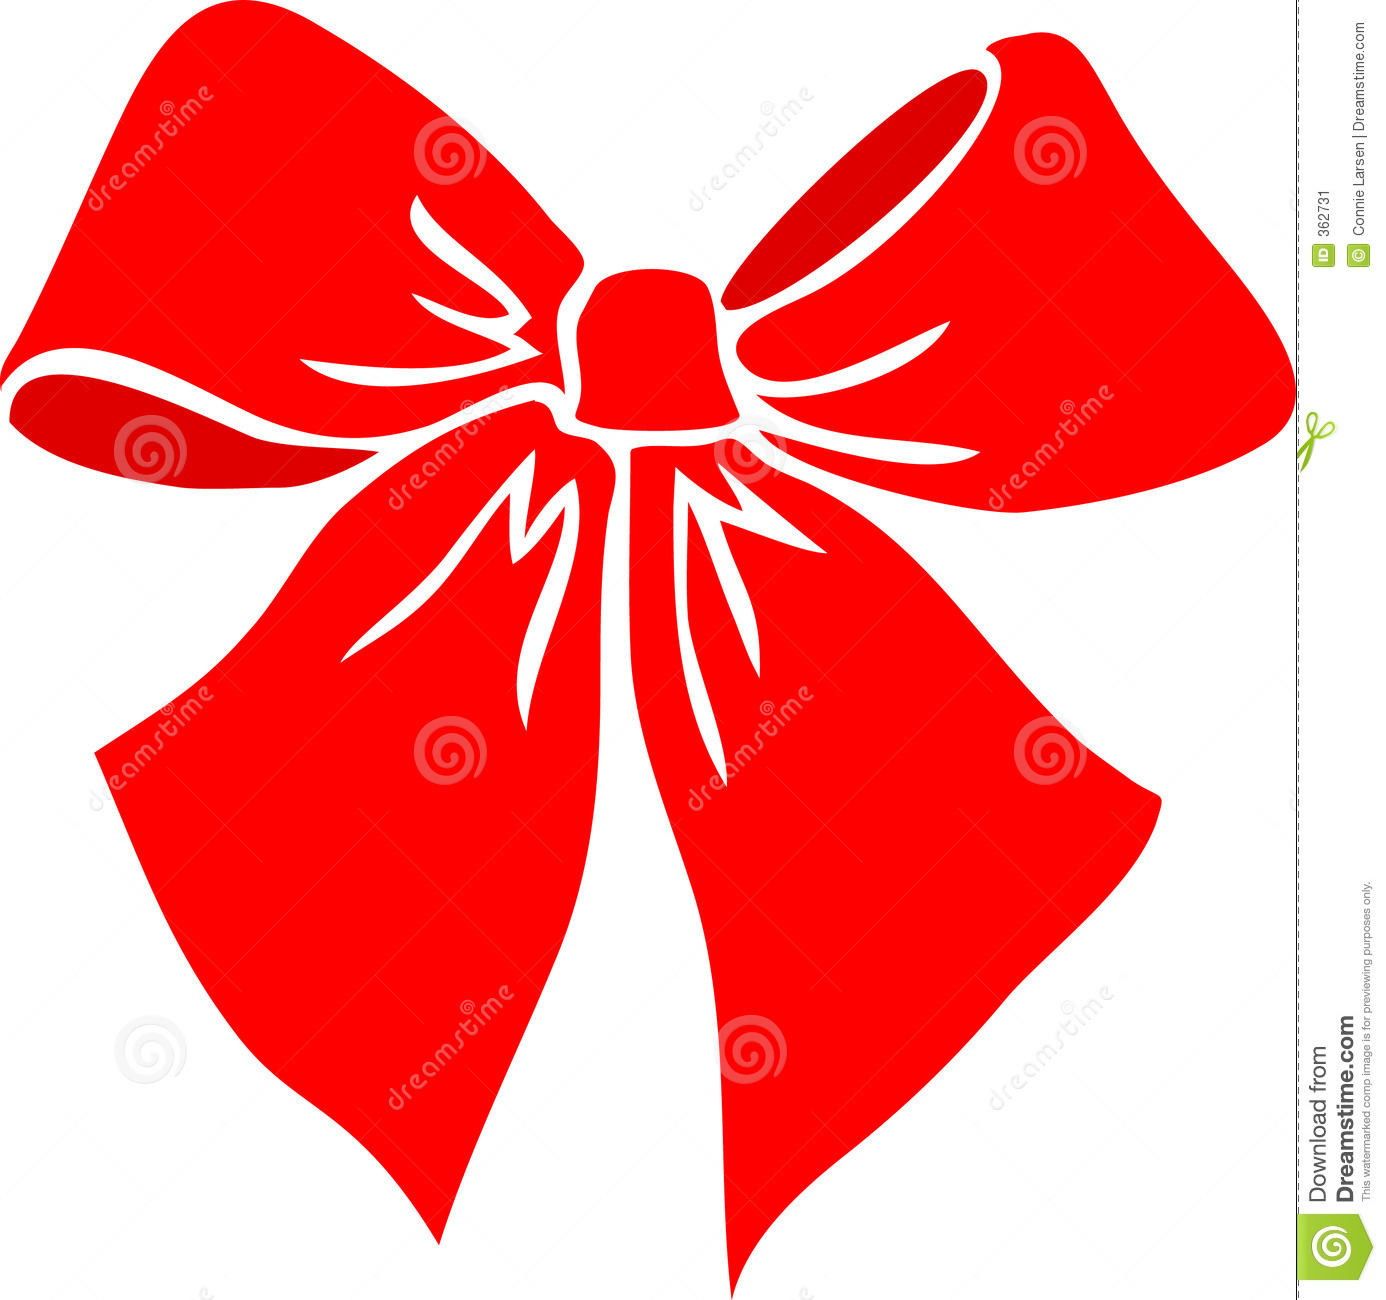 Red Bow Eps Stock Image   Image  362731